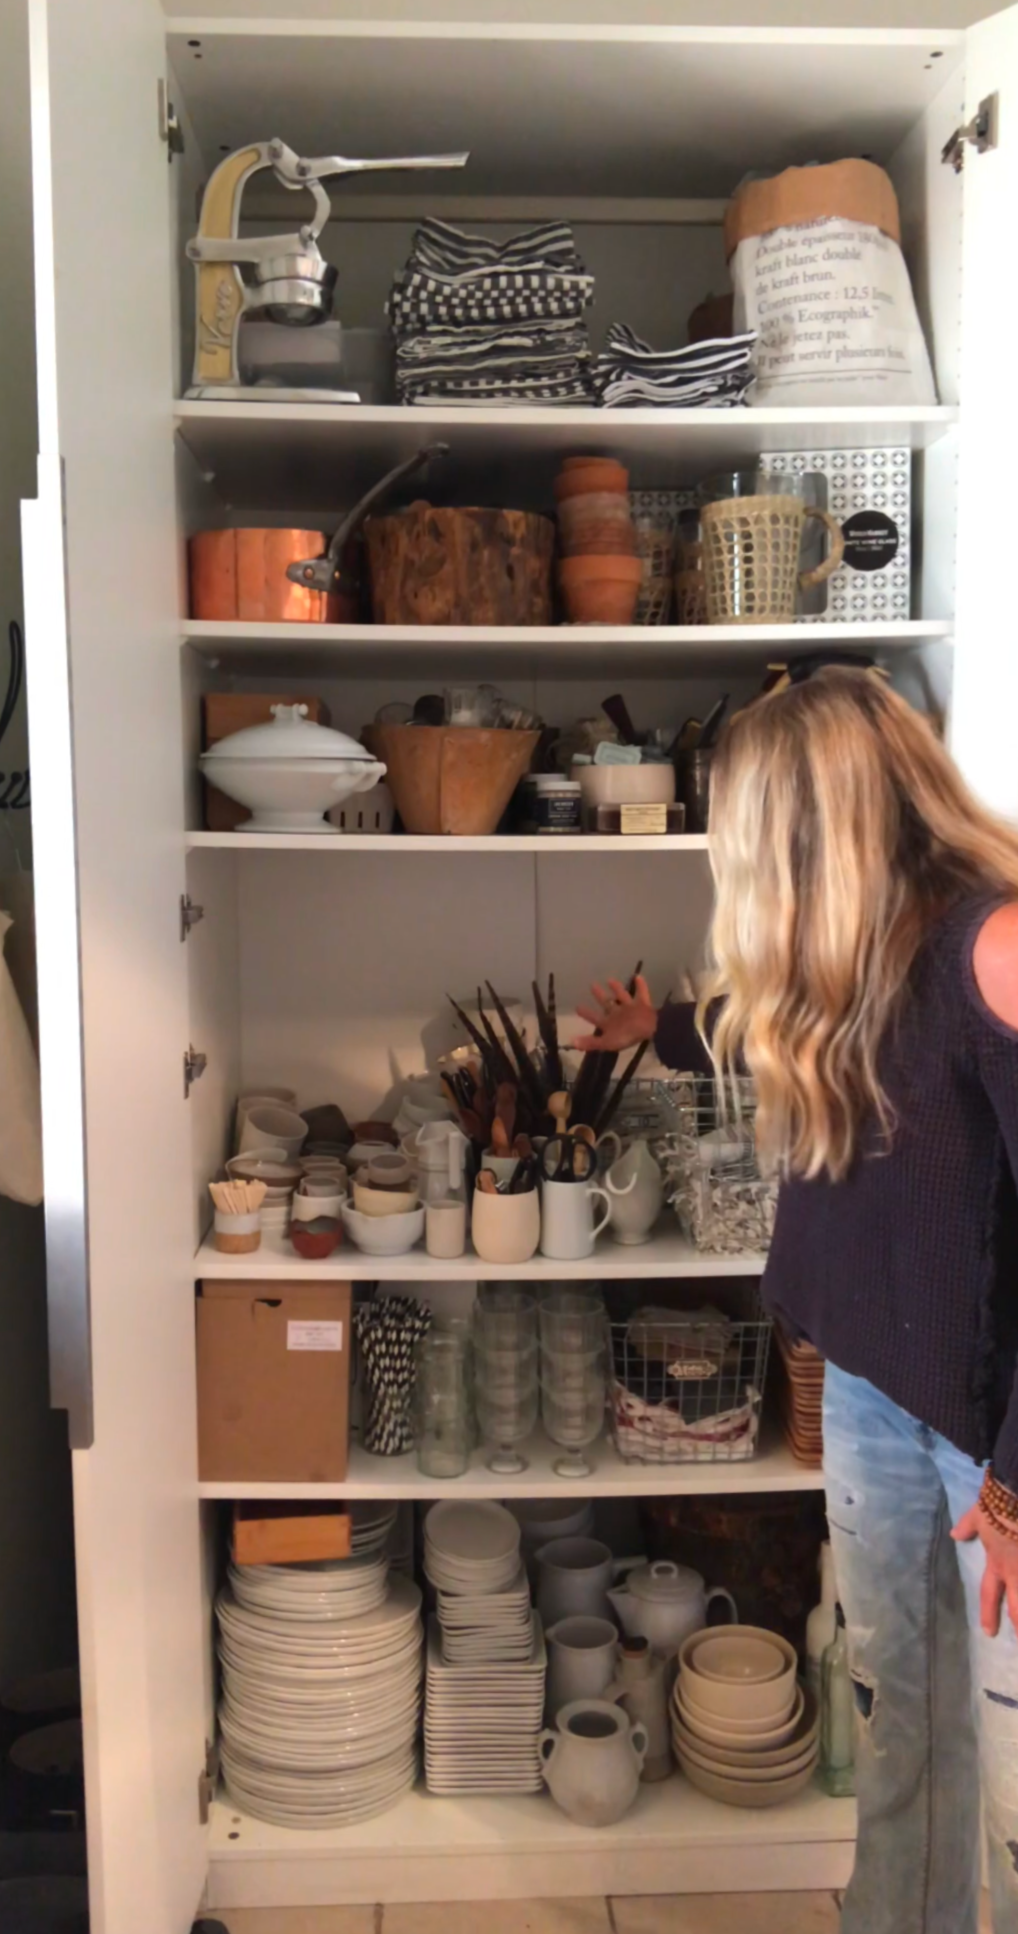 A Video of What is Inside our Entertaining Cabinets and Favorite Sources!